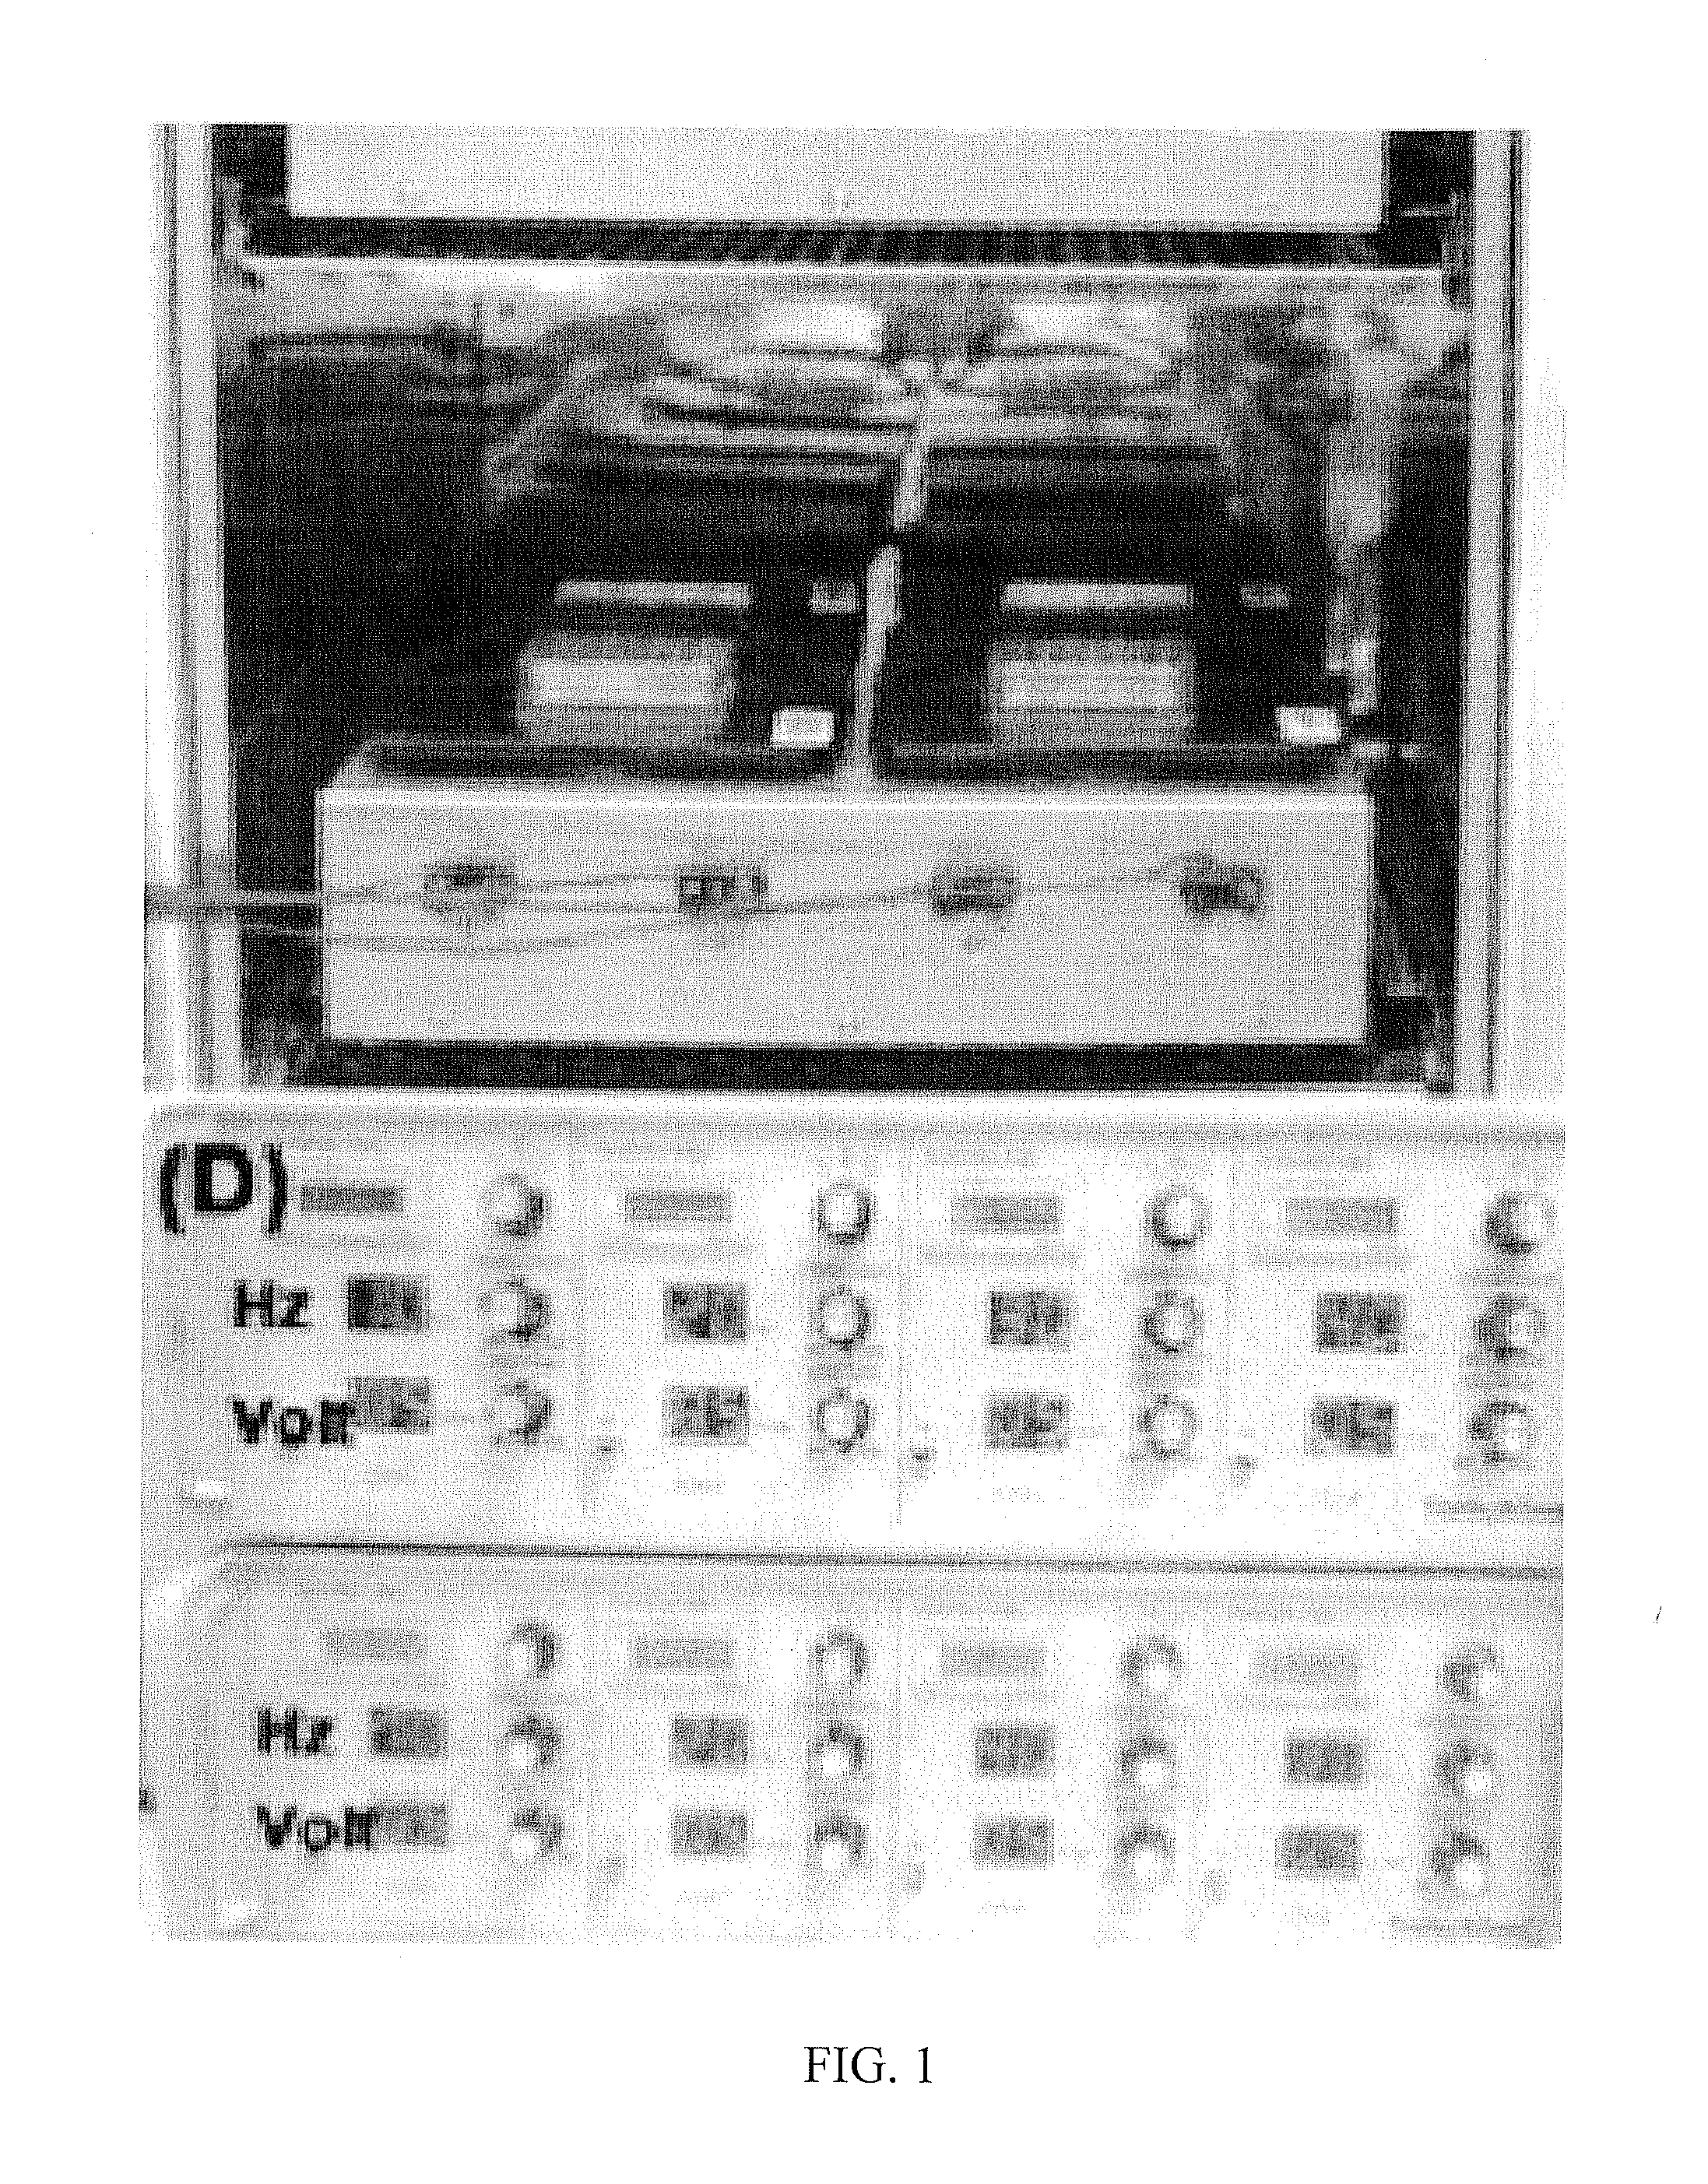 Method for inducing differentiation of mesenchymal stem cells to nerve cells using sound waves